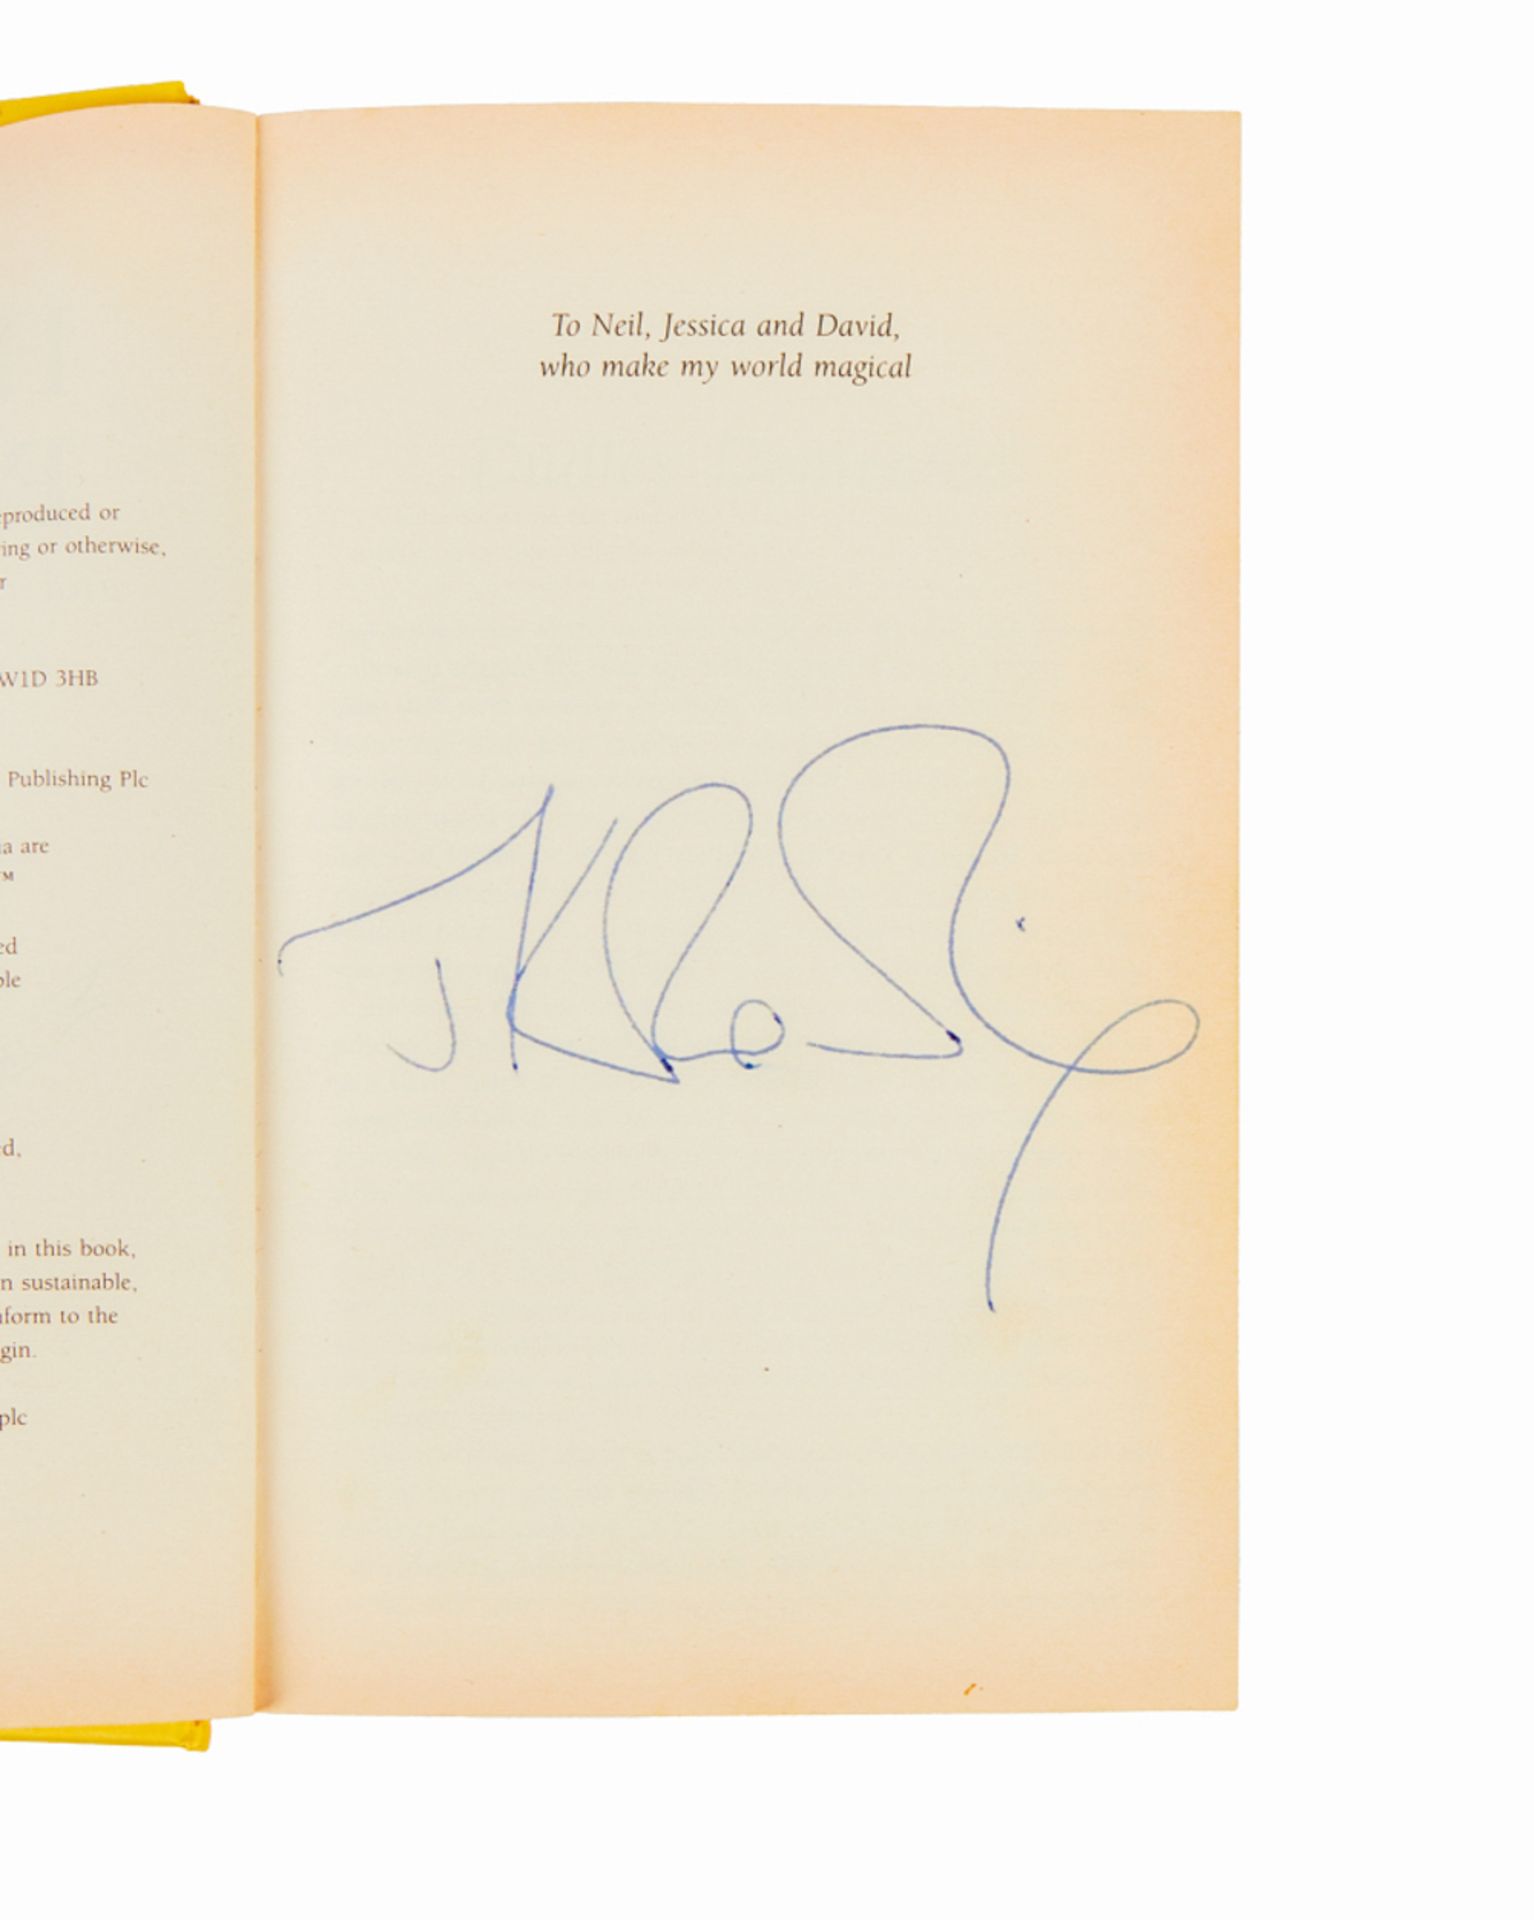 HARRY POTTER AND THE ORDER OF THE PHOENIX | J.K. ROWLING SIGNED FIRST-EDITION BOOK - Image 4 of 5